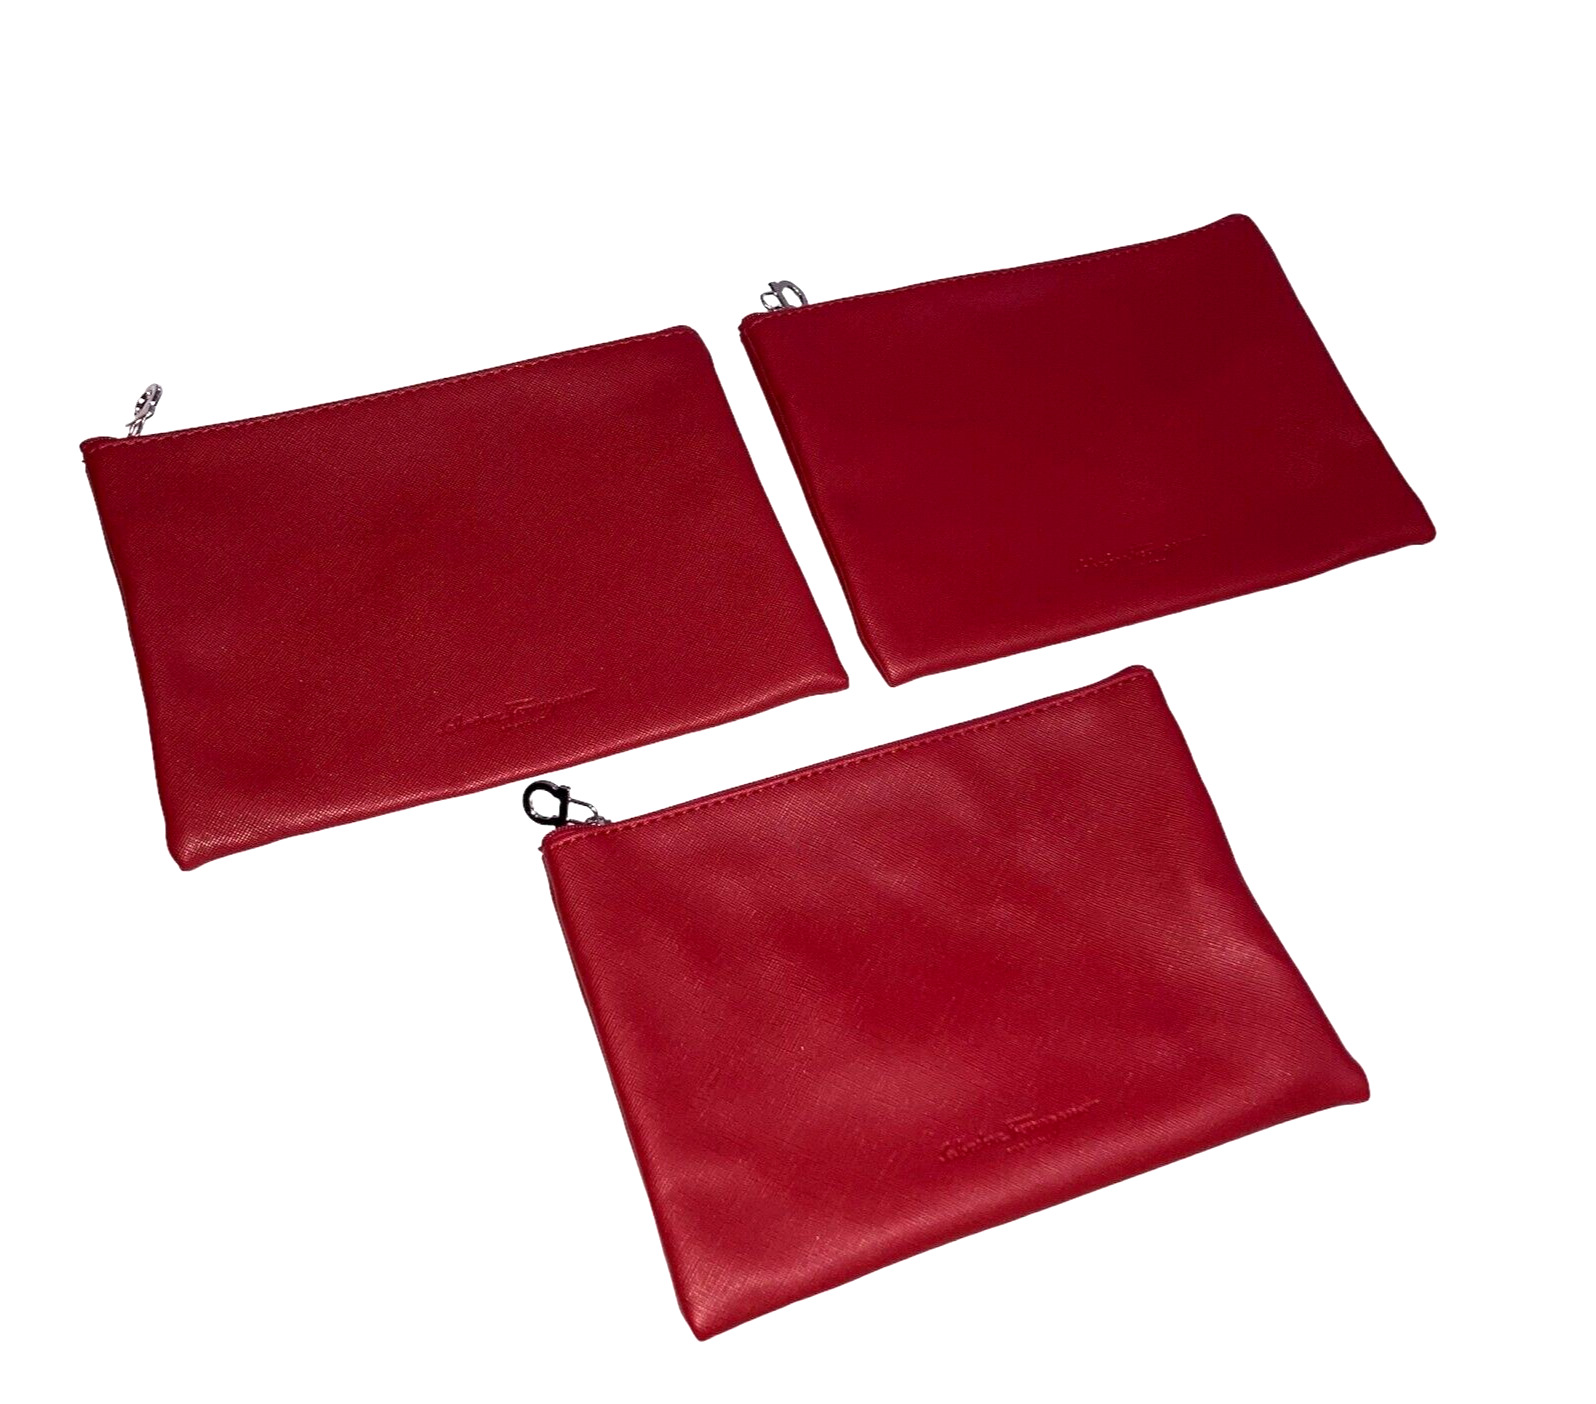 Salvatore Ferragamo Turkish Airlines  Zippered Red Amenity Pouch Lot of 3 Empty